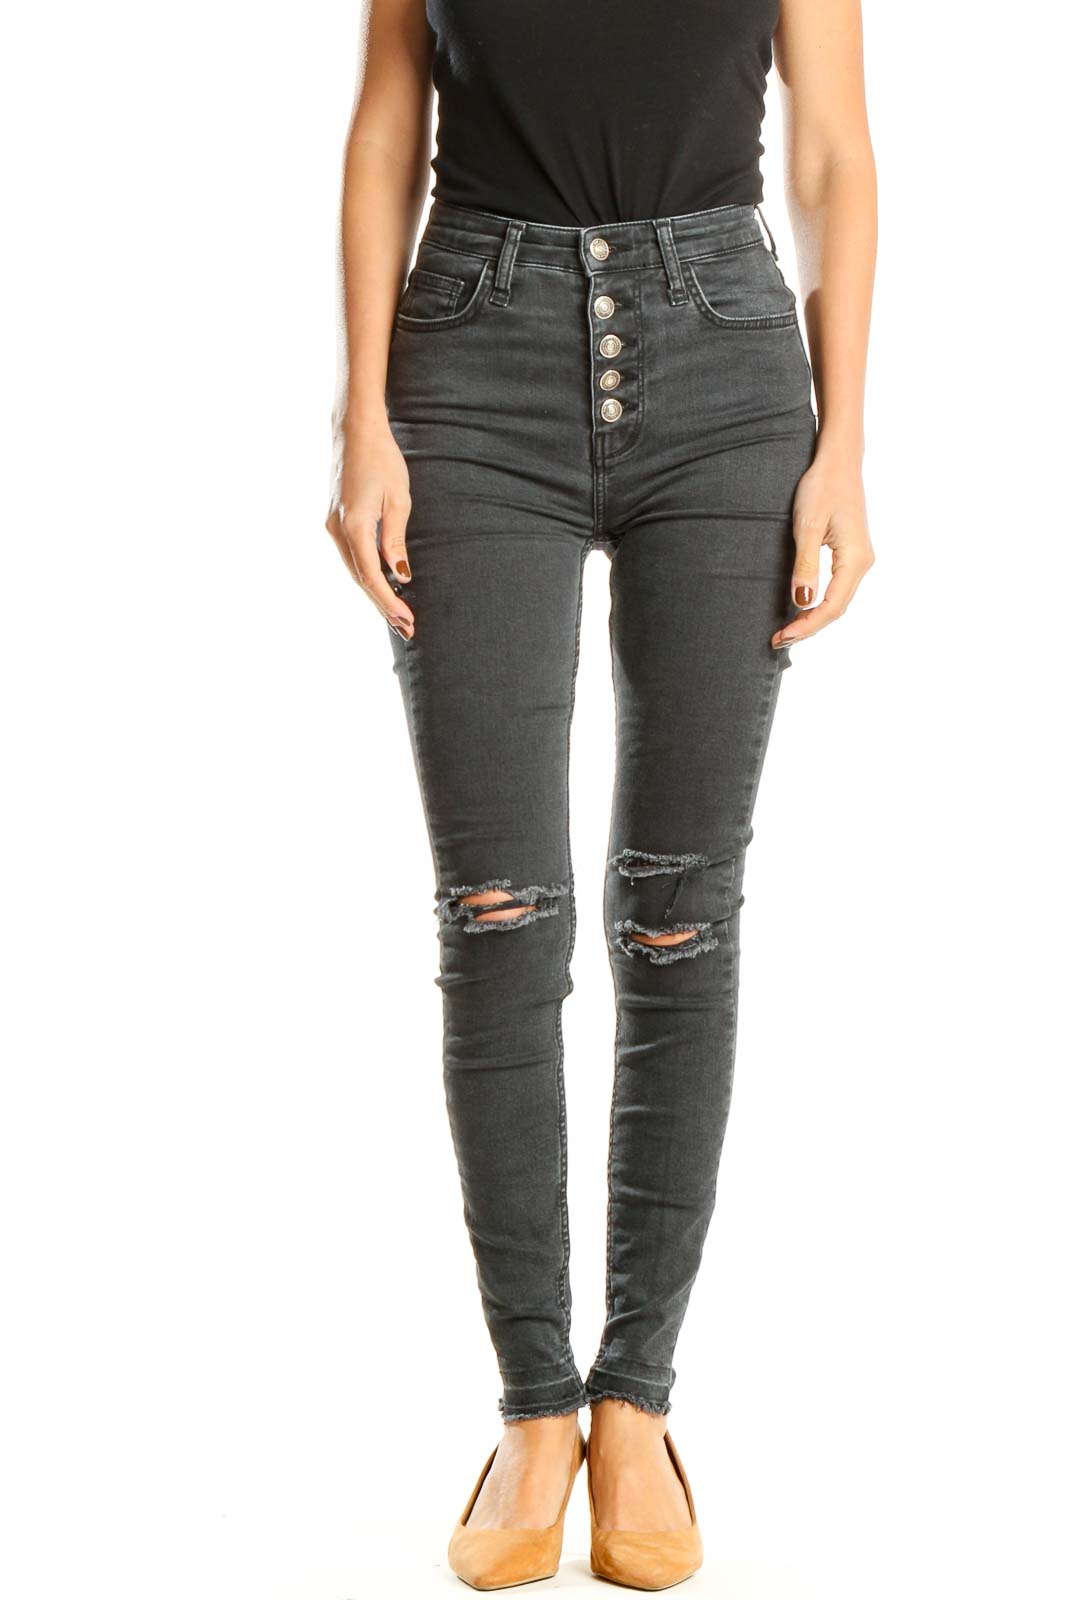 Gray Black High Waisted Distressed Skinny Jeans Front